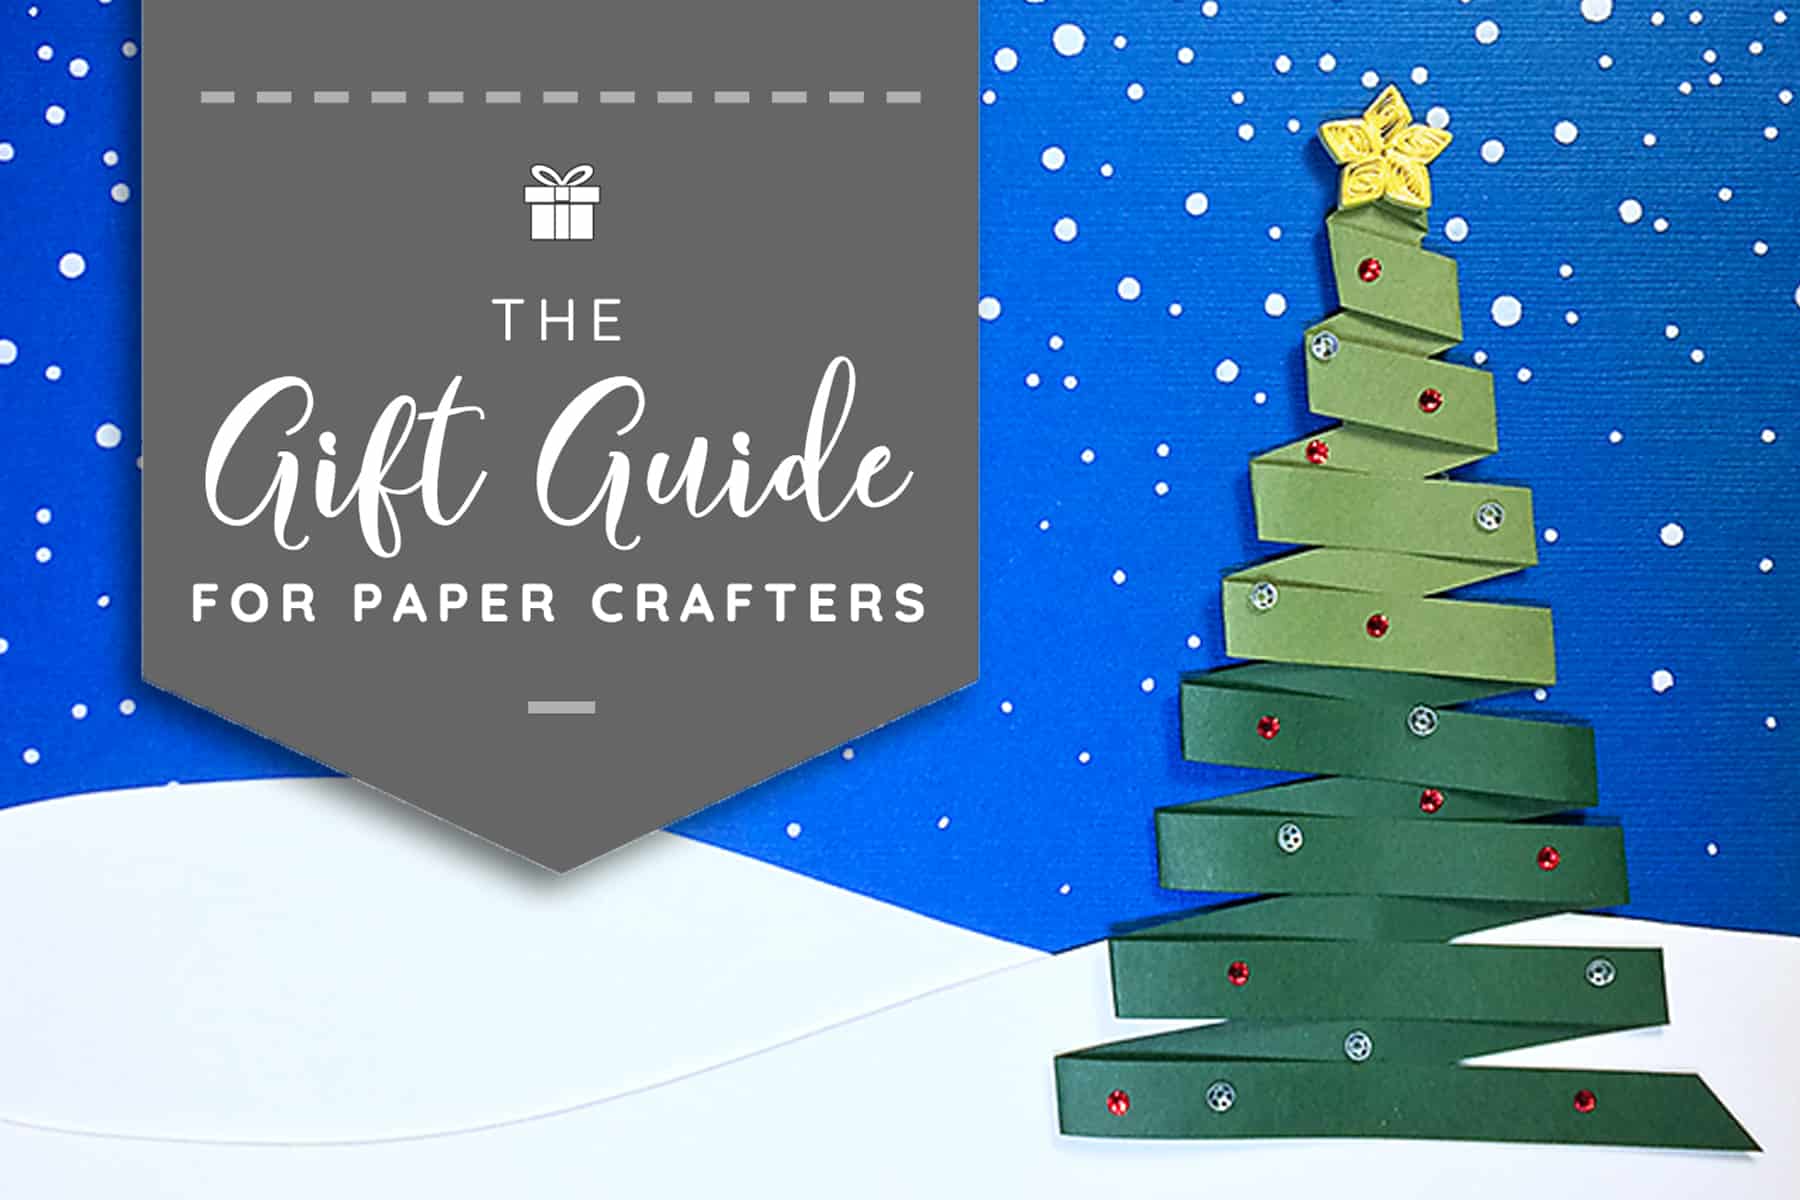 Paper Crafters' Gift Ideas For The Holidays